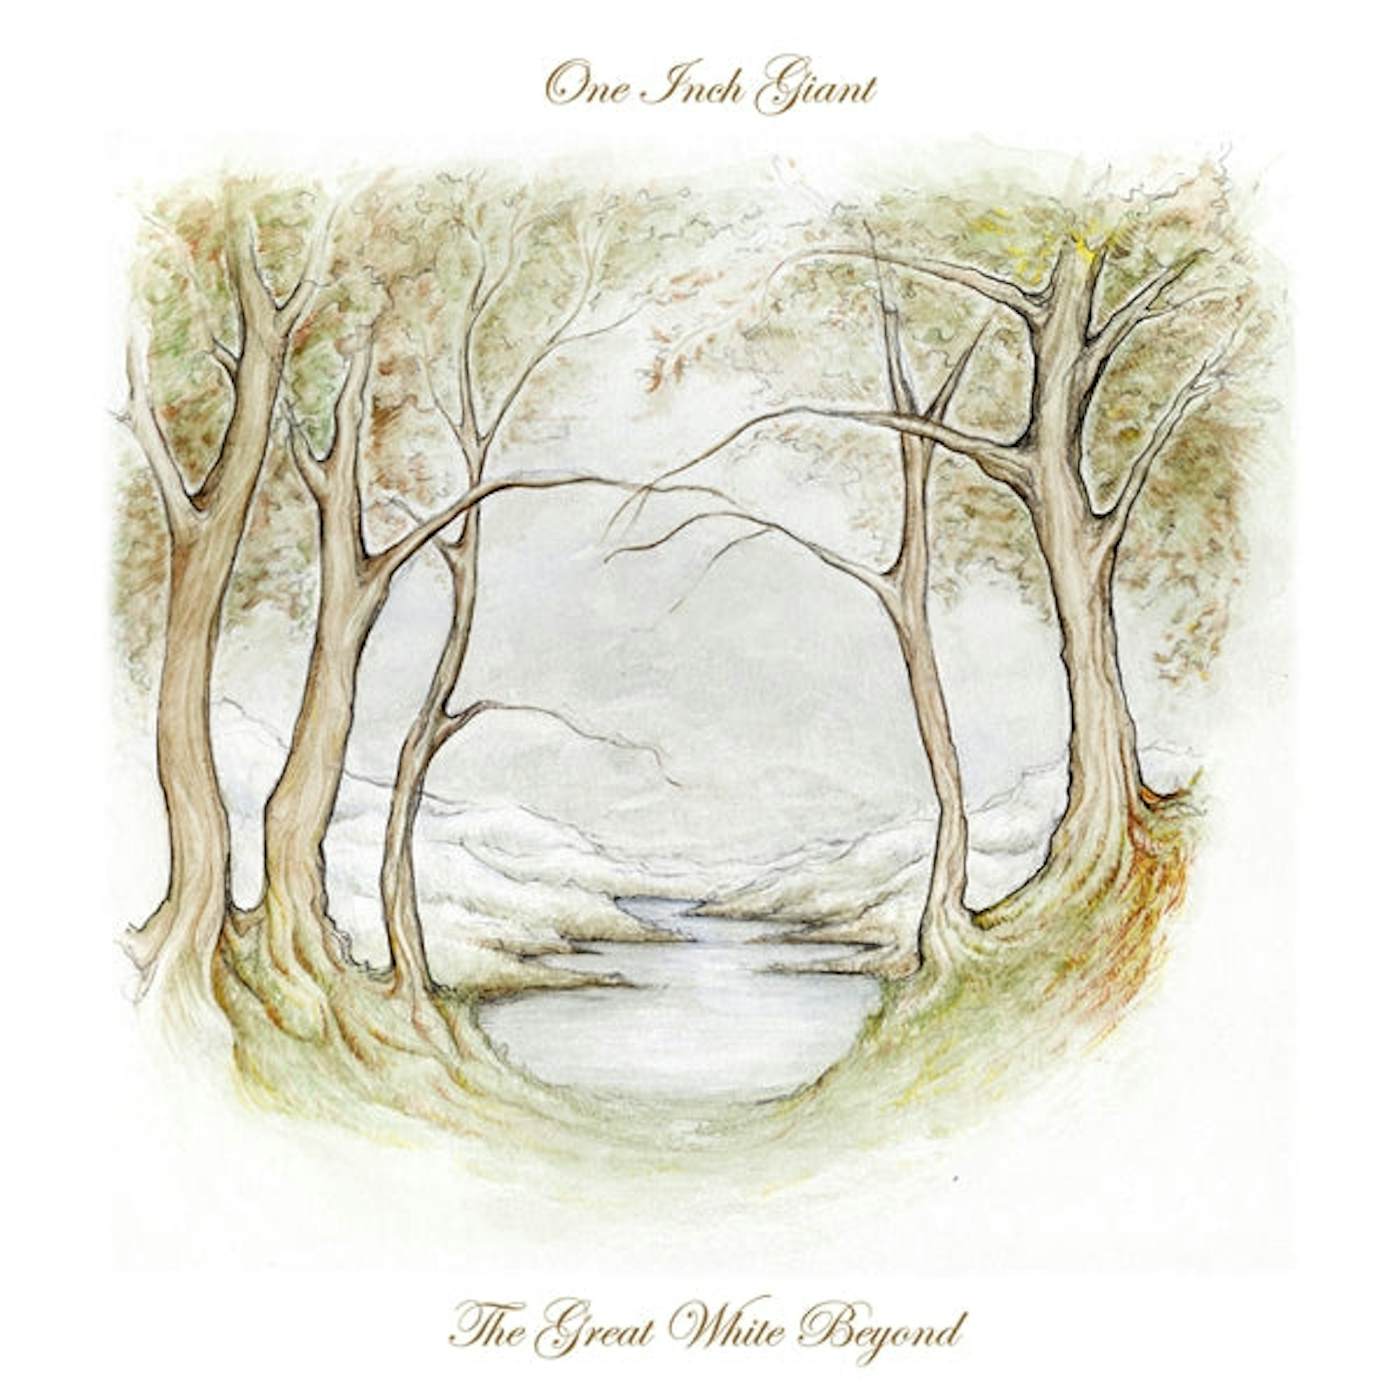 One Inch Giant LP - The Great White Beyond (Vinyl)